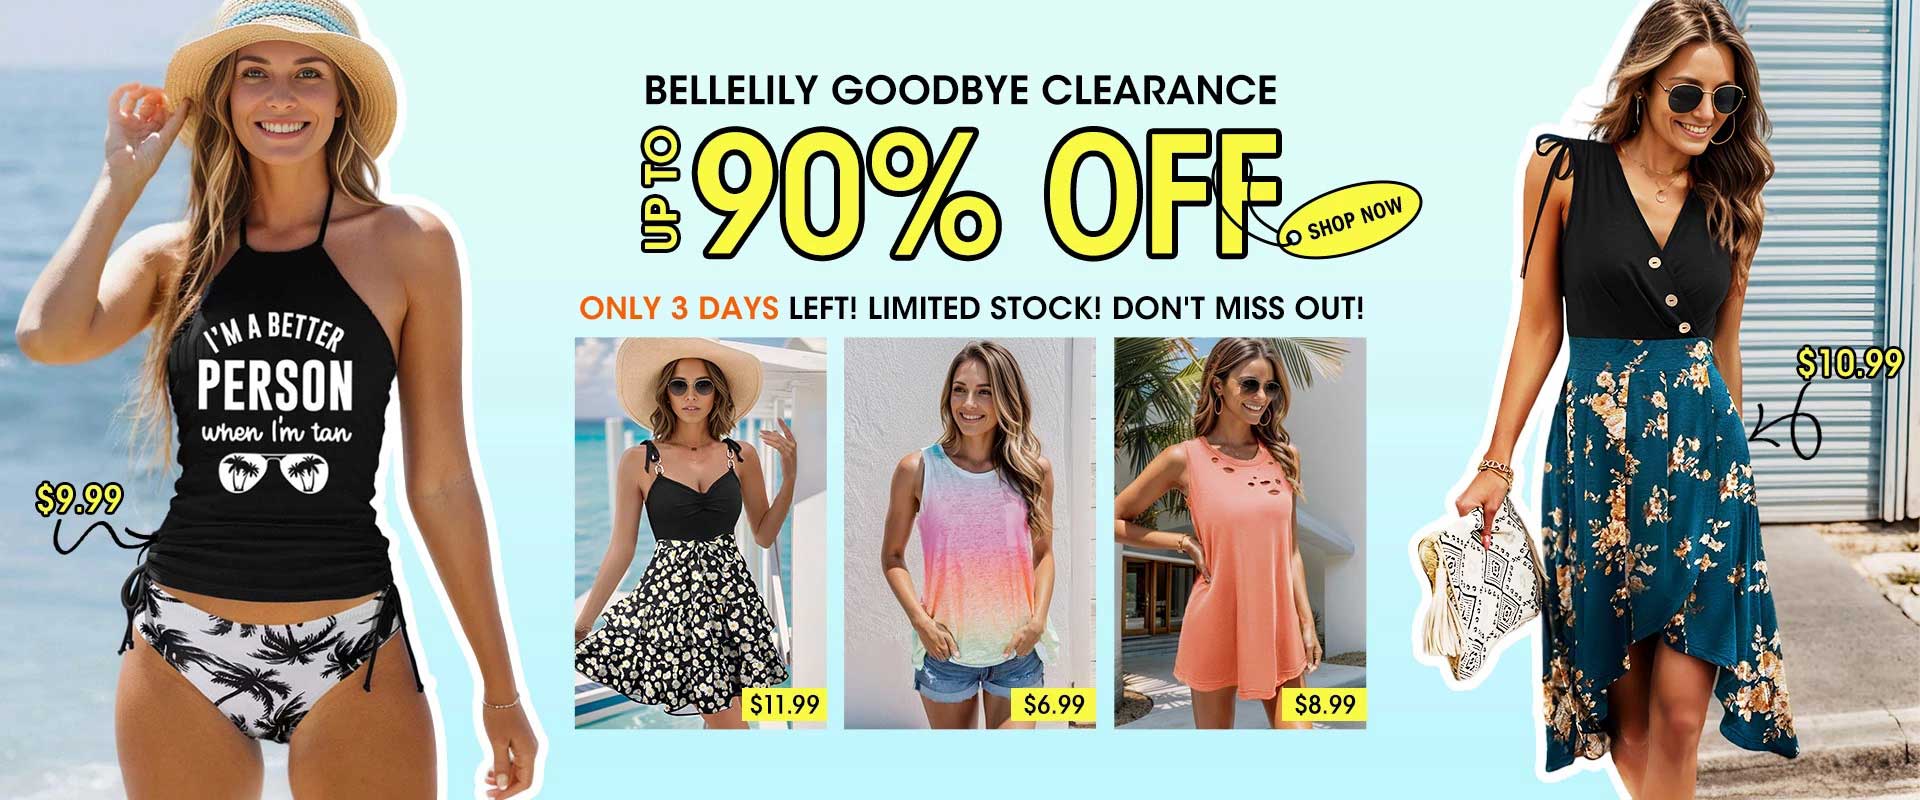 Clearance Sale at Bellelily